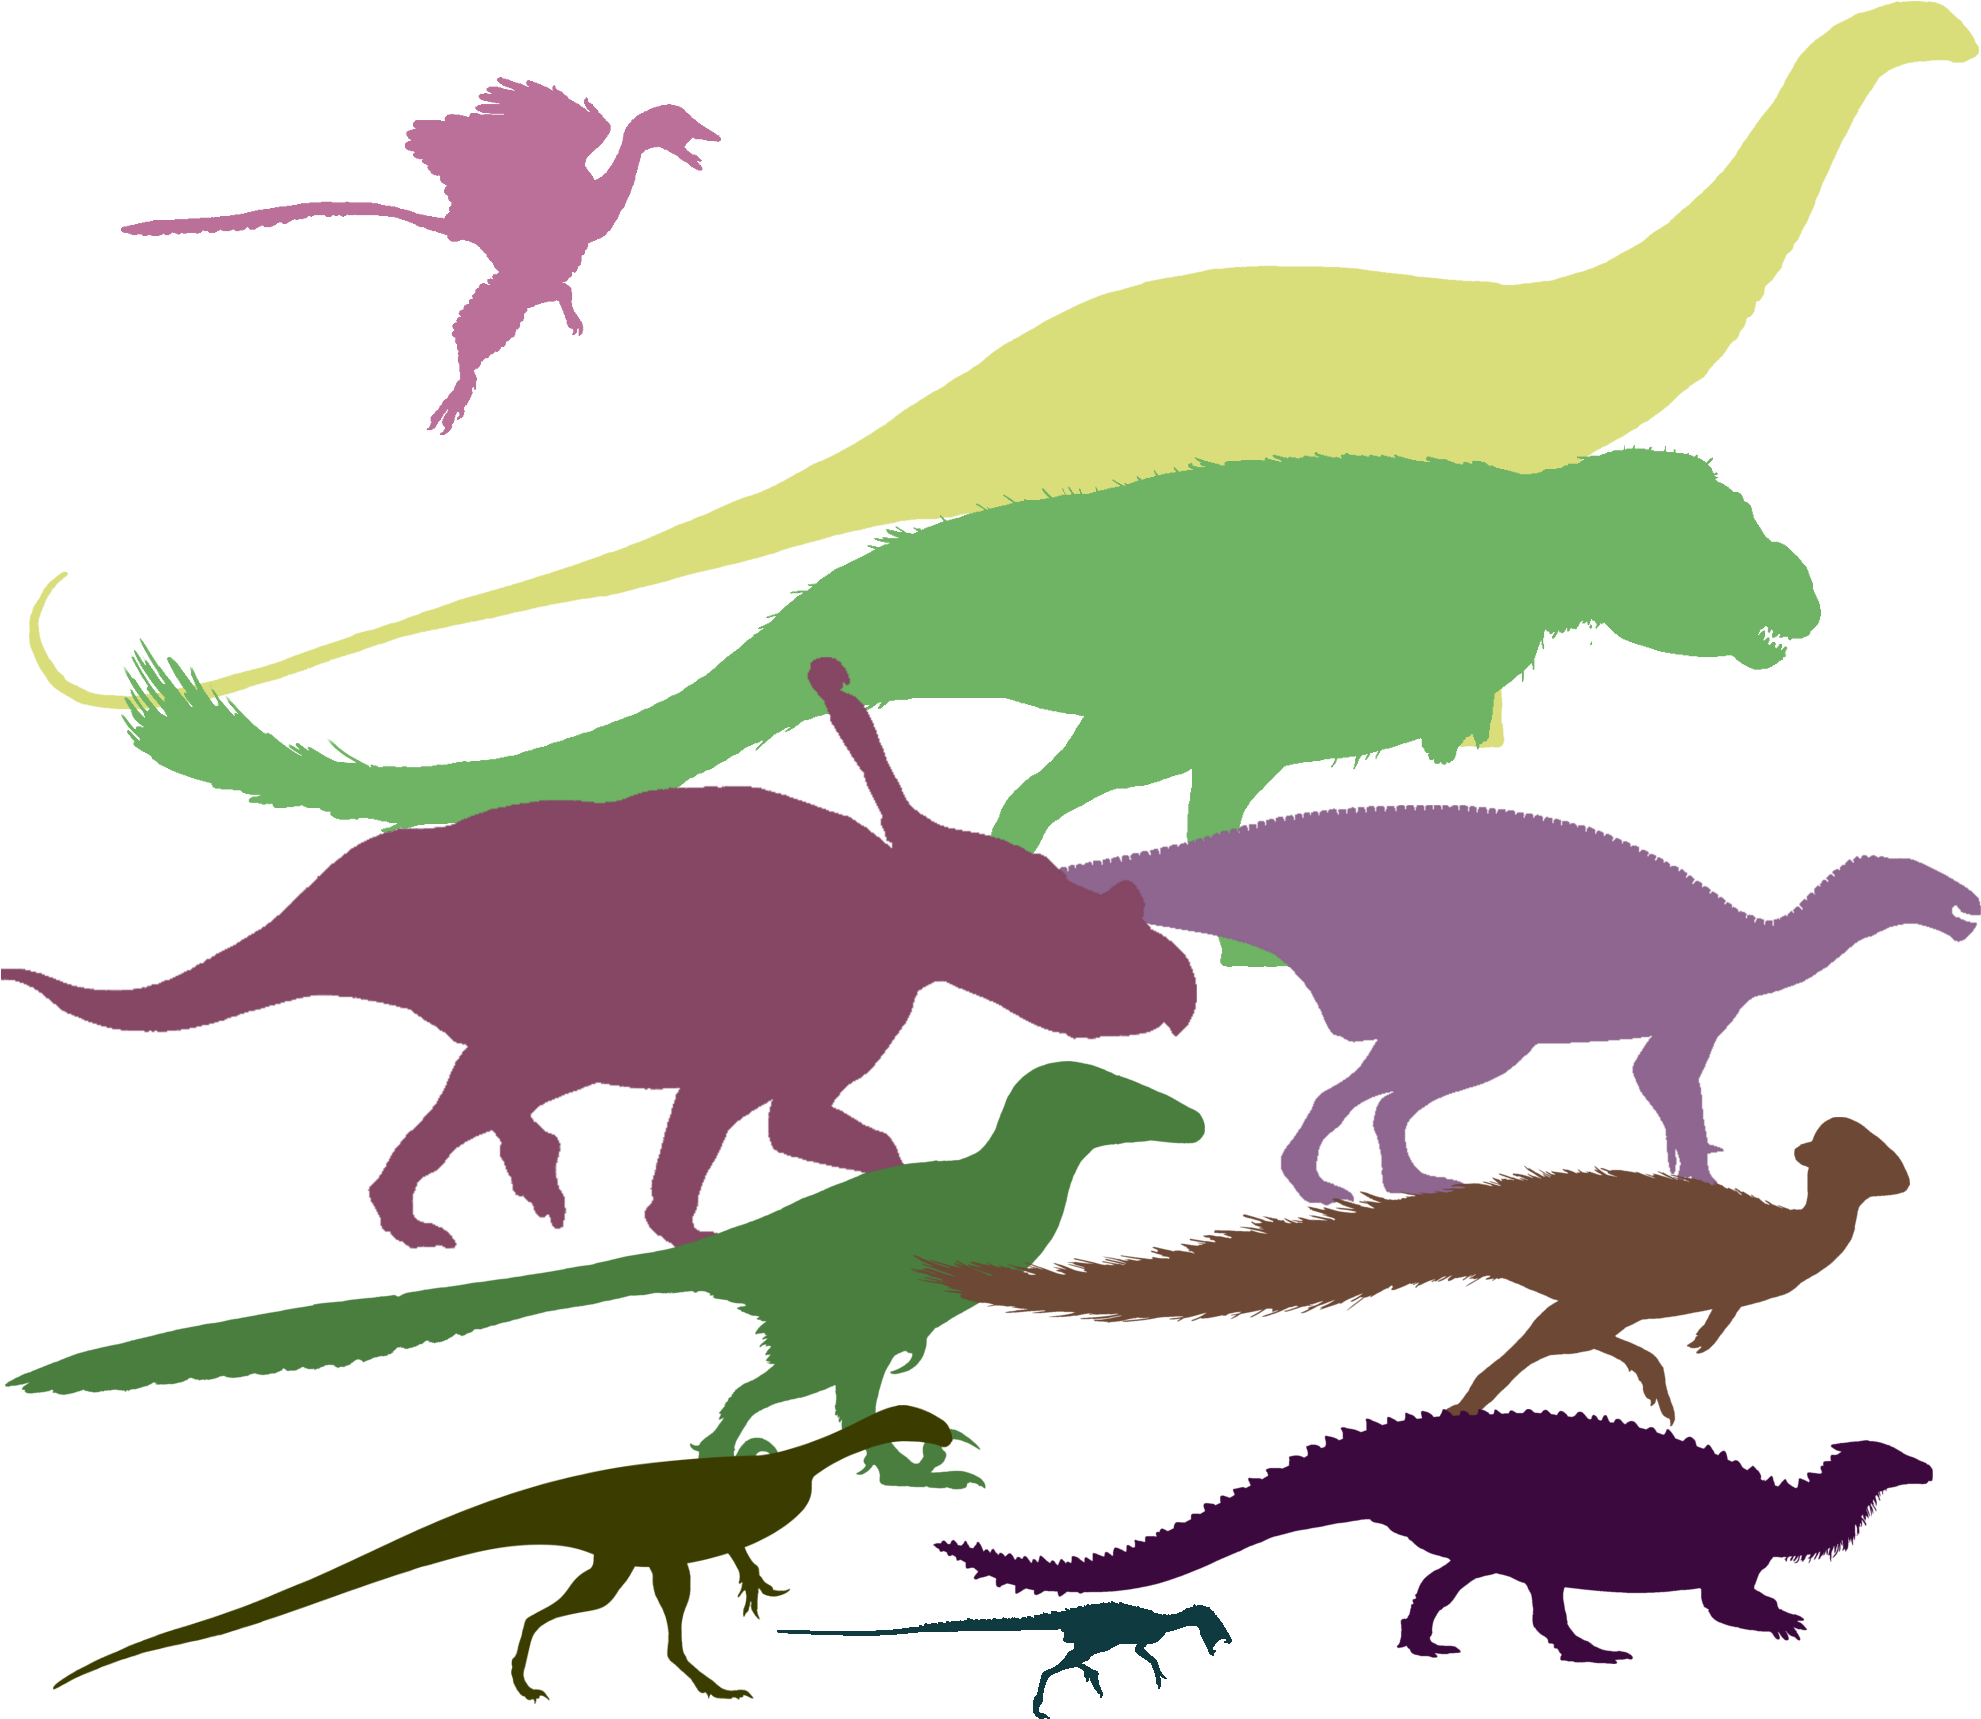 Dinoproject-icon2 - Portable Network Graphics (2000x1800)